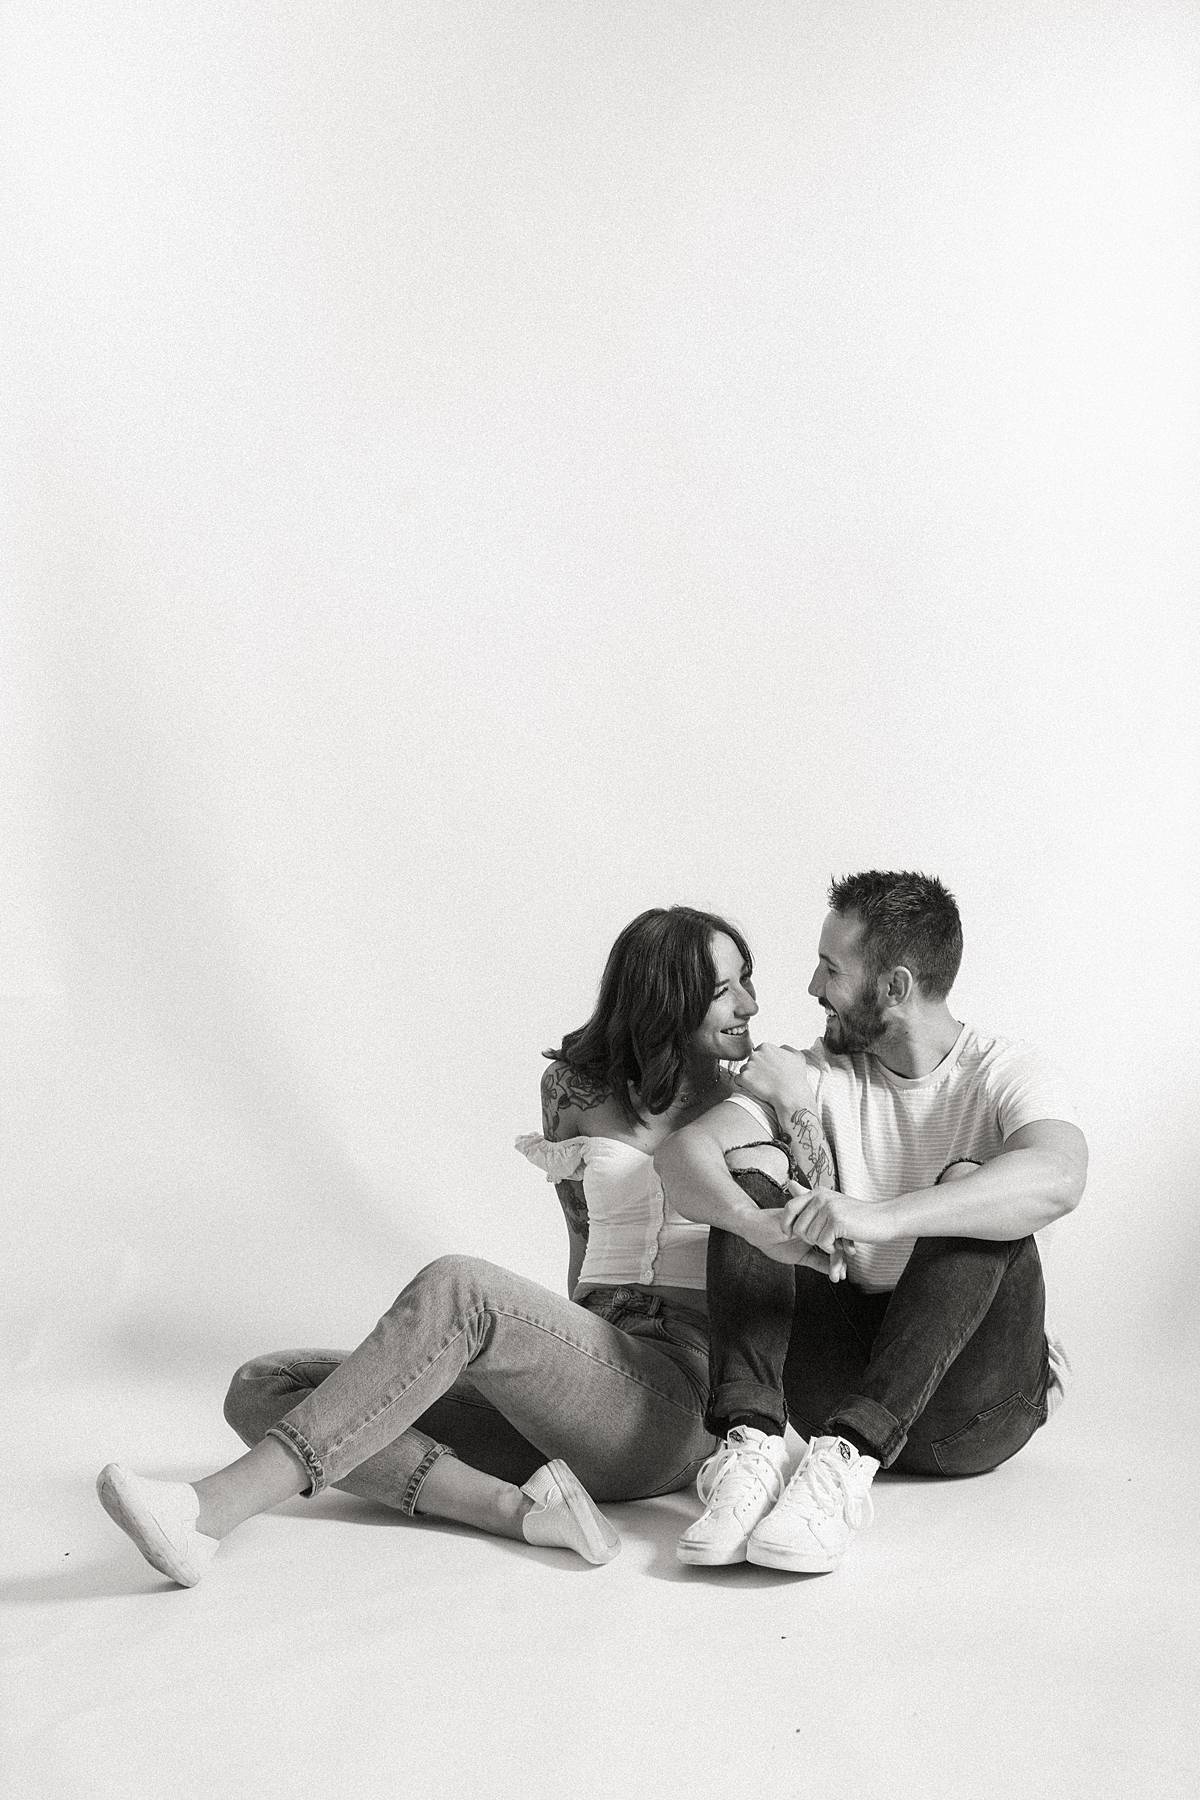 30 Best Couple Poses for Portrait Photography